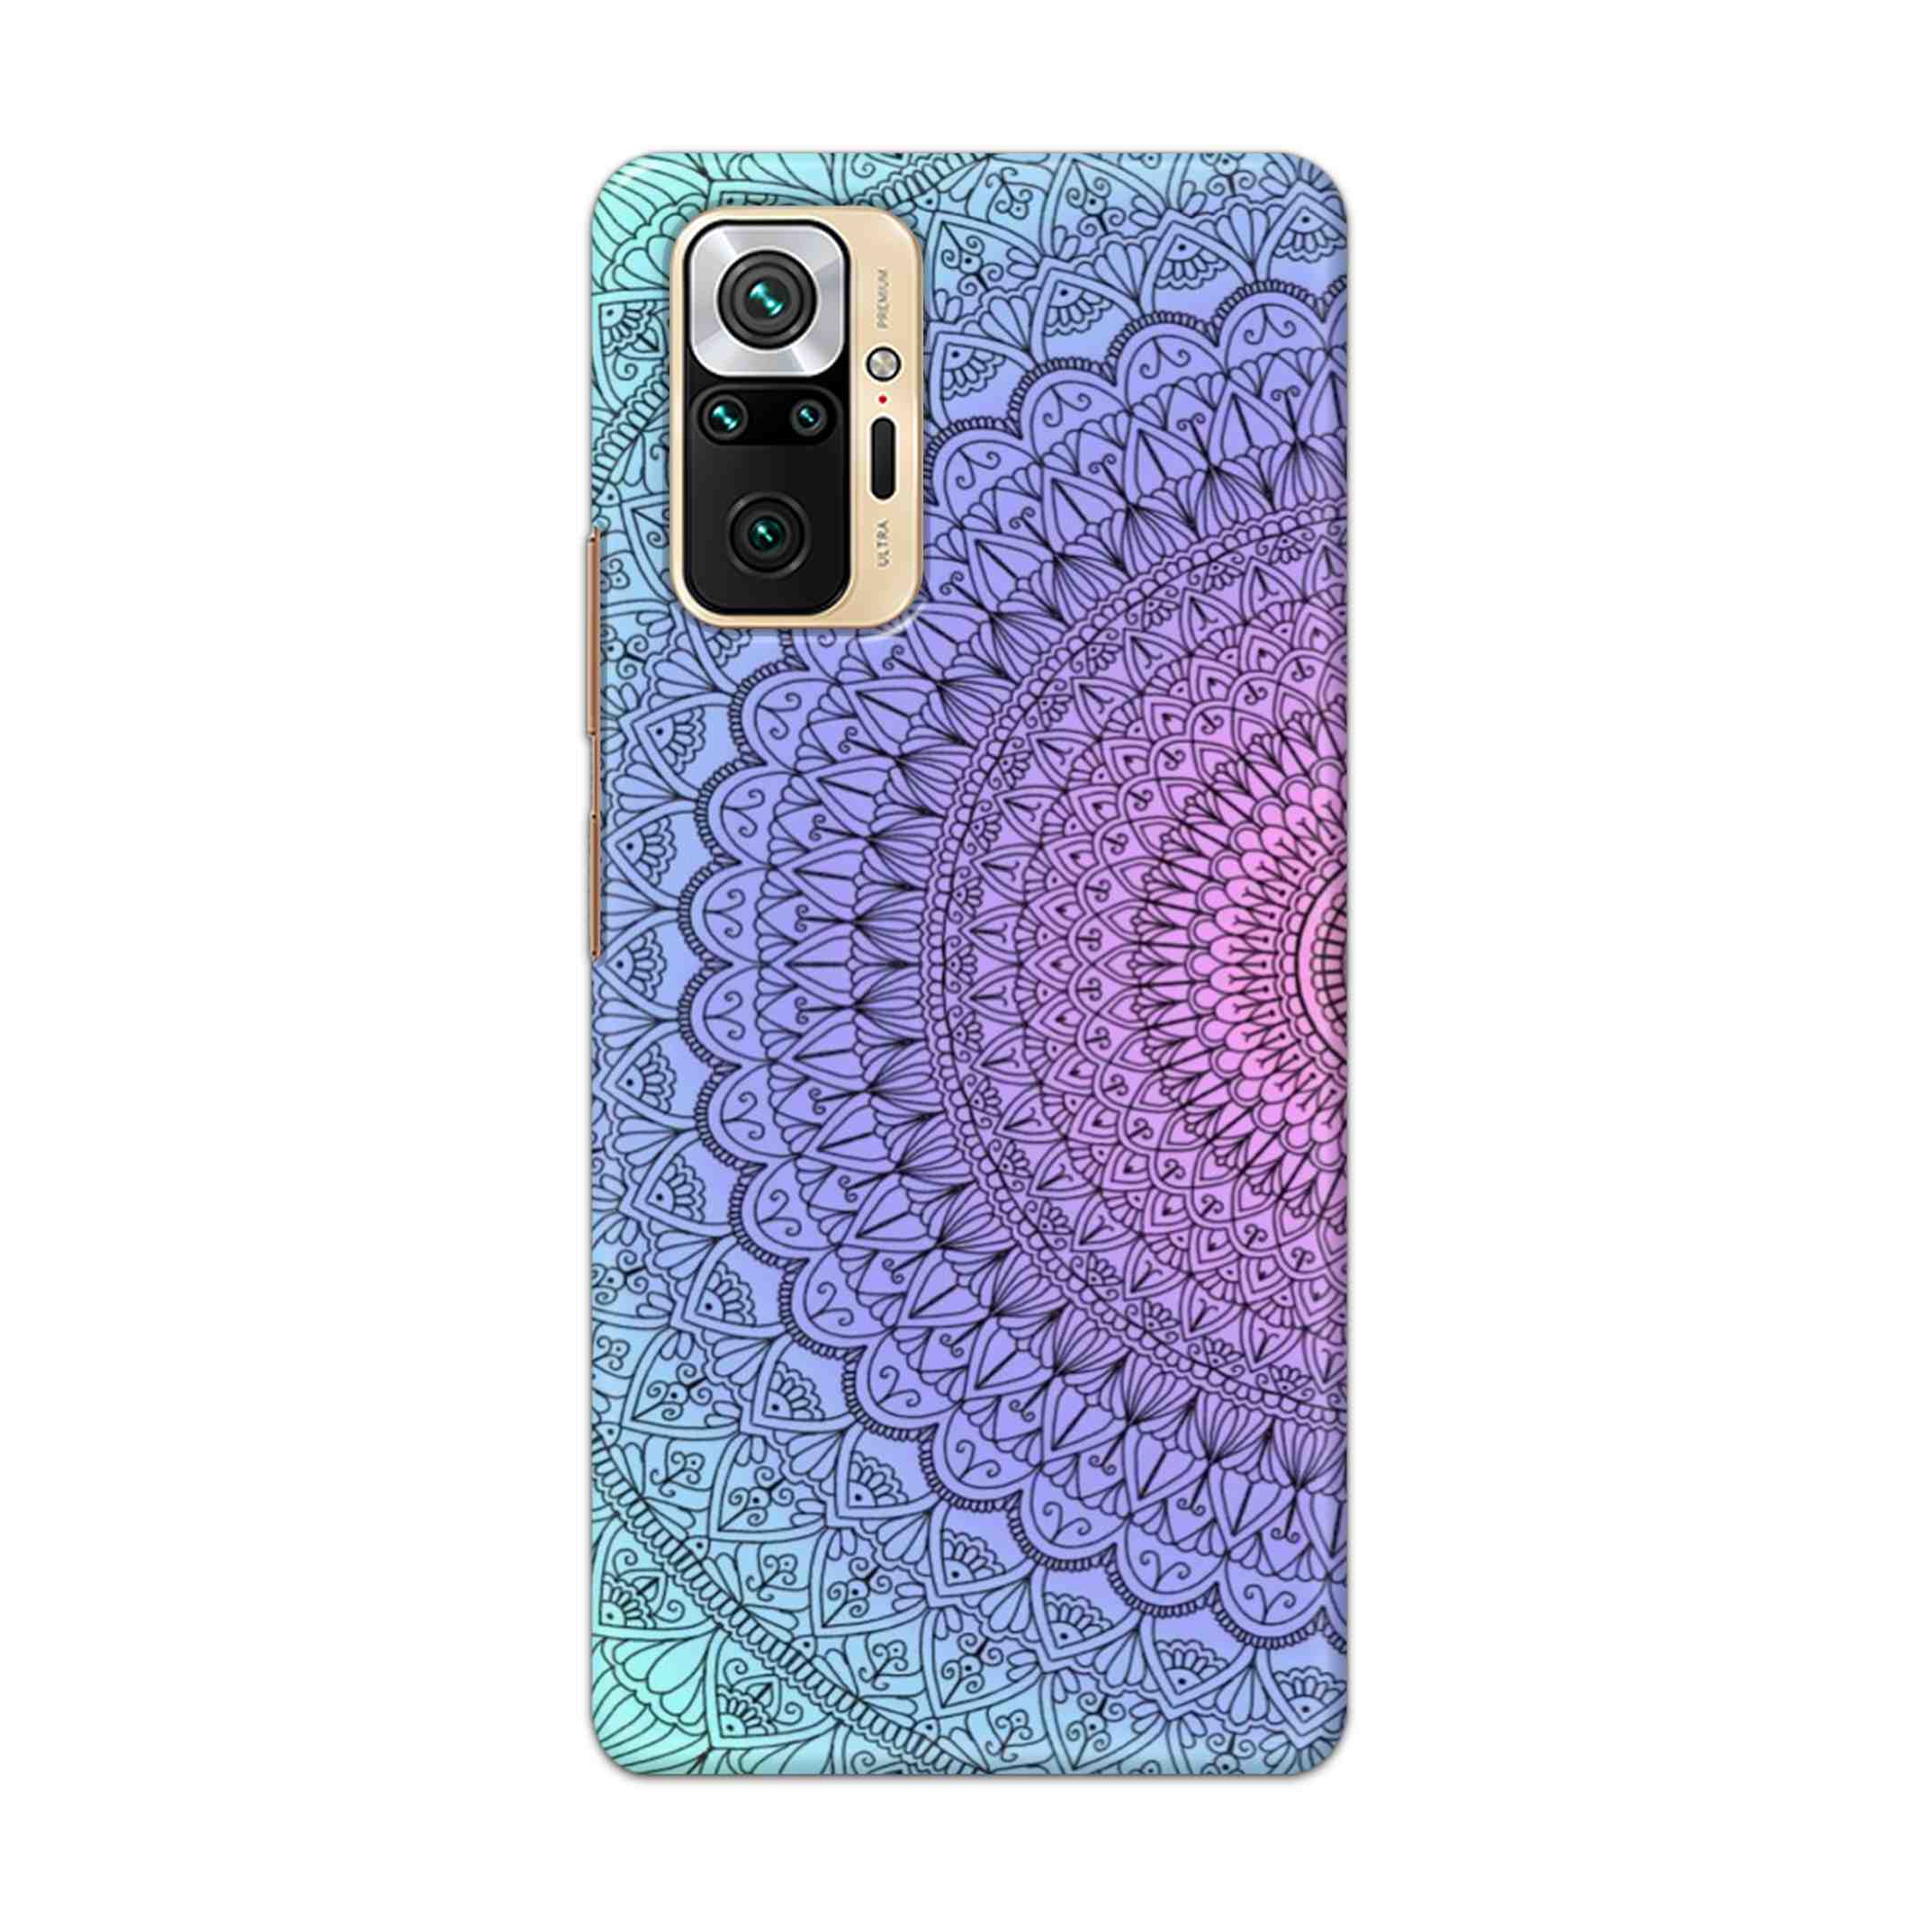 Buy Colourful Mandala Hard Back Mobile Phone Case Cover For Redmi Note 10 Pro Online